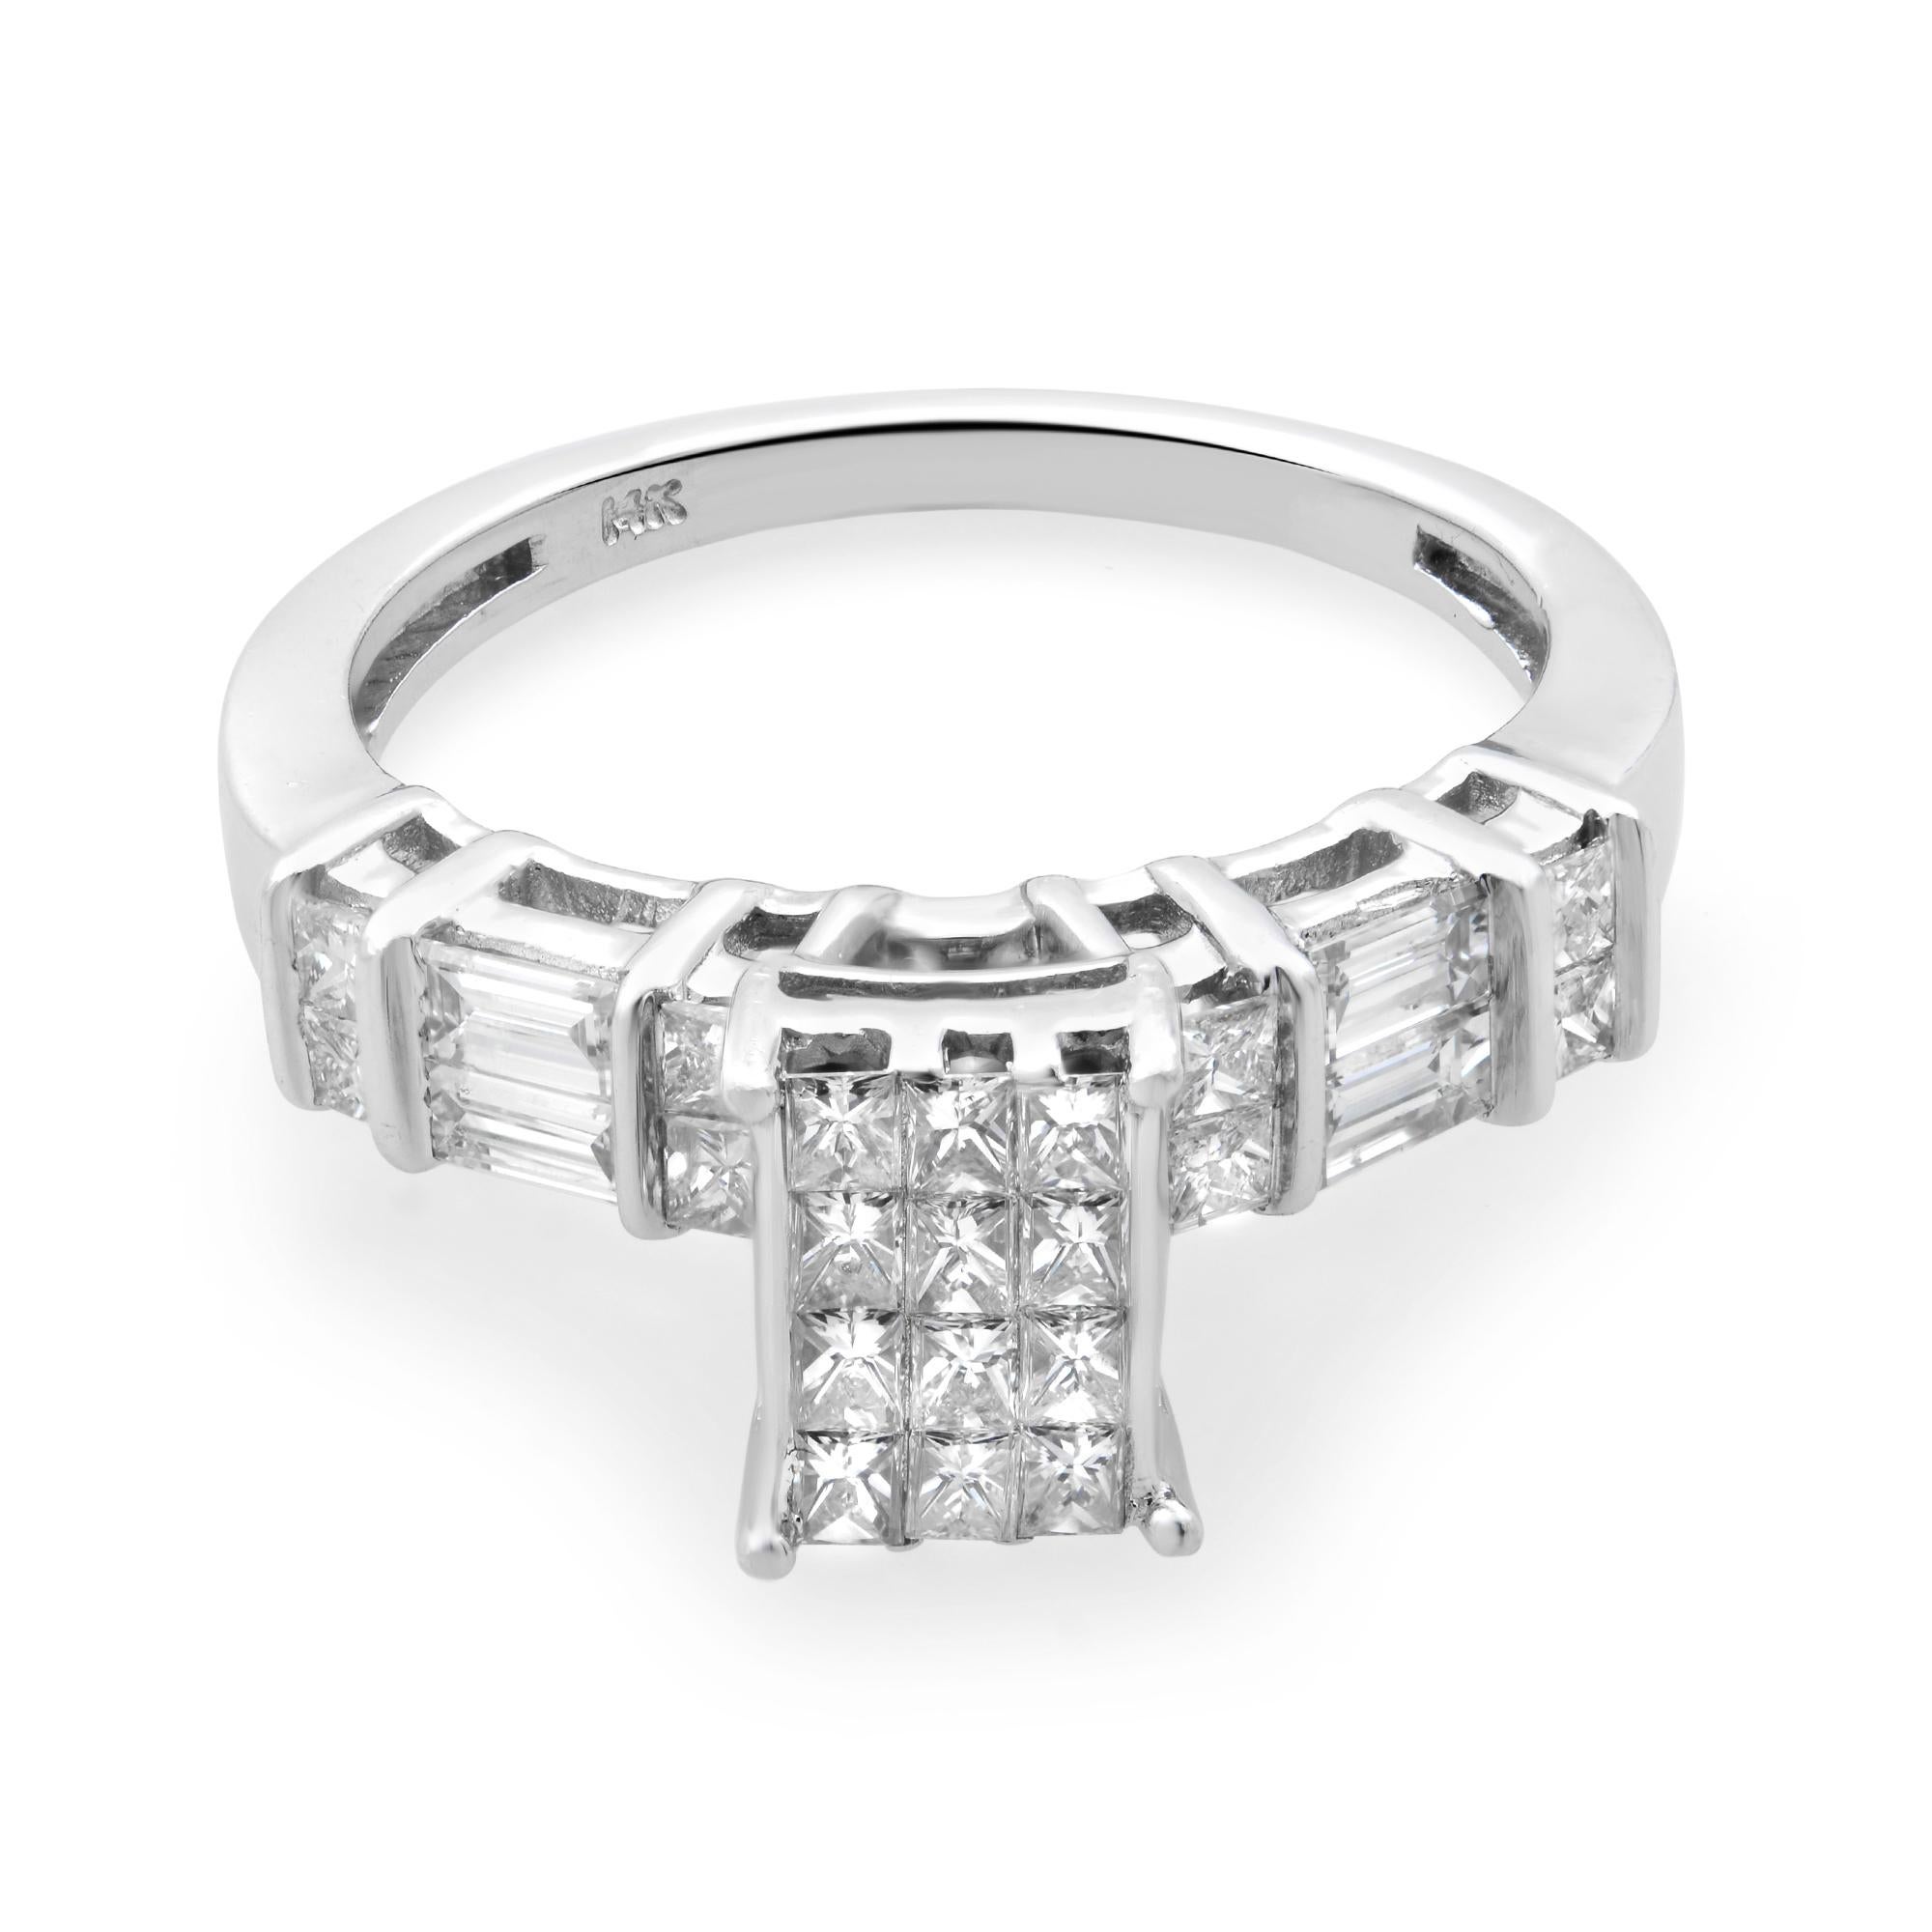 This stunning engagement ring is crafted in 14k white gold. It features princess cut diamonds encrusted in the center rectangular shank in an invisible setting giving an illusion of a bigger size diamond with baguettes and princess cut diamonds on